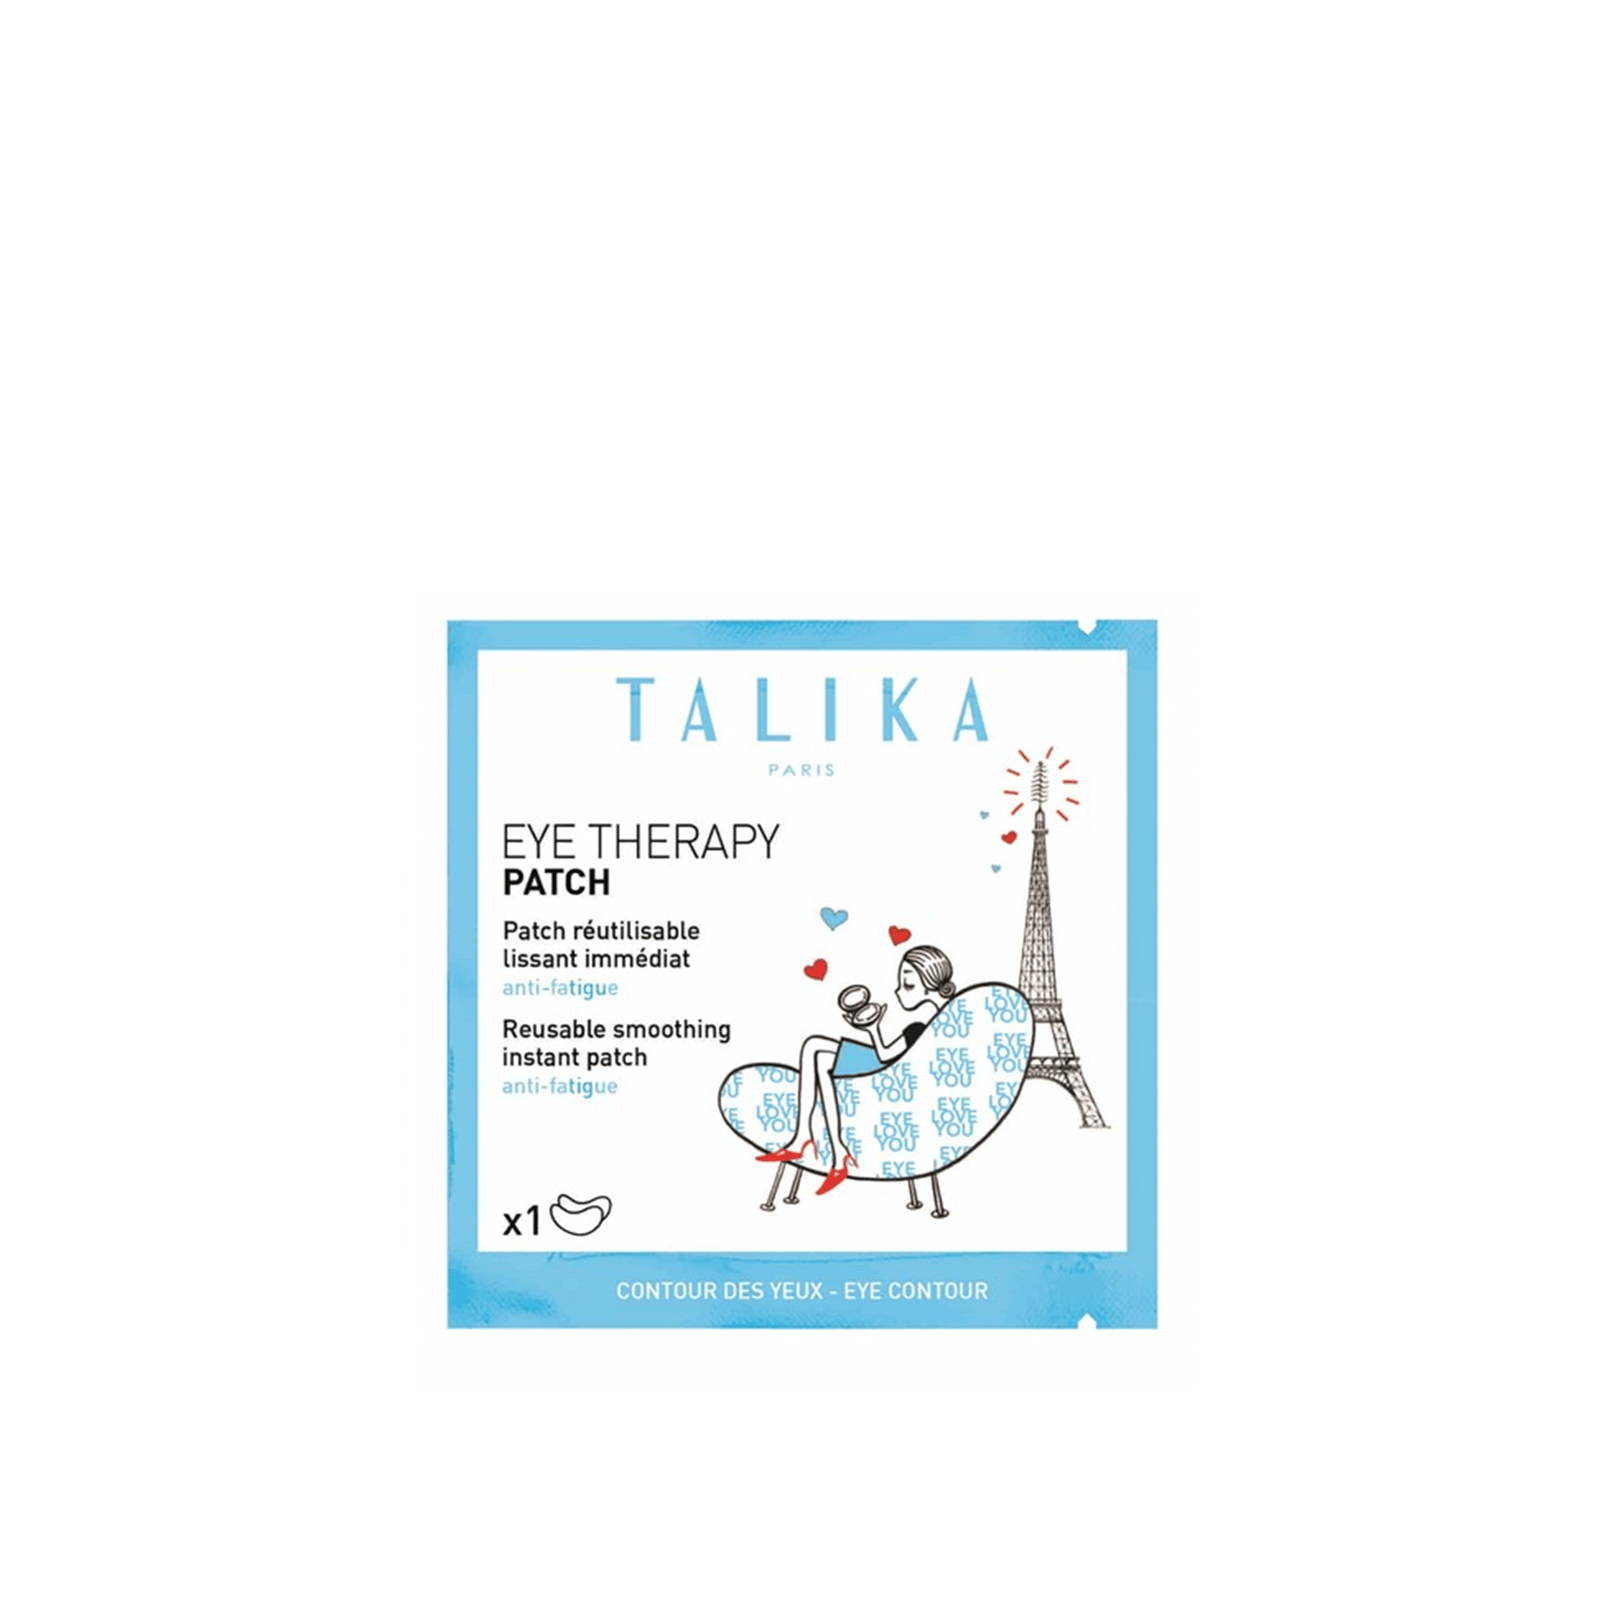 Talika Eye Therapy Reusable Smoothing Instant Patch x1